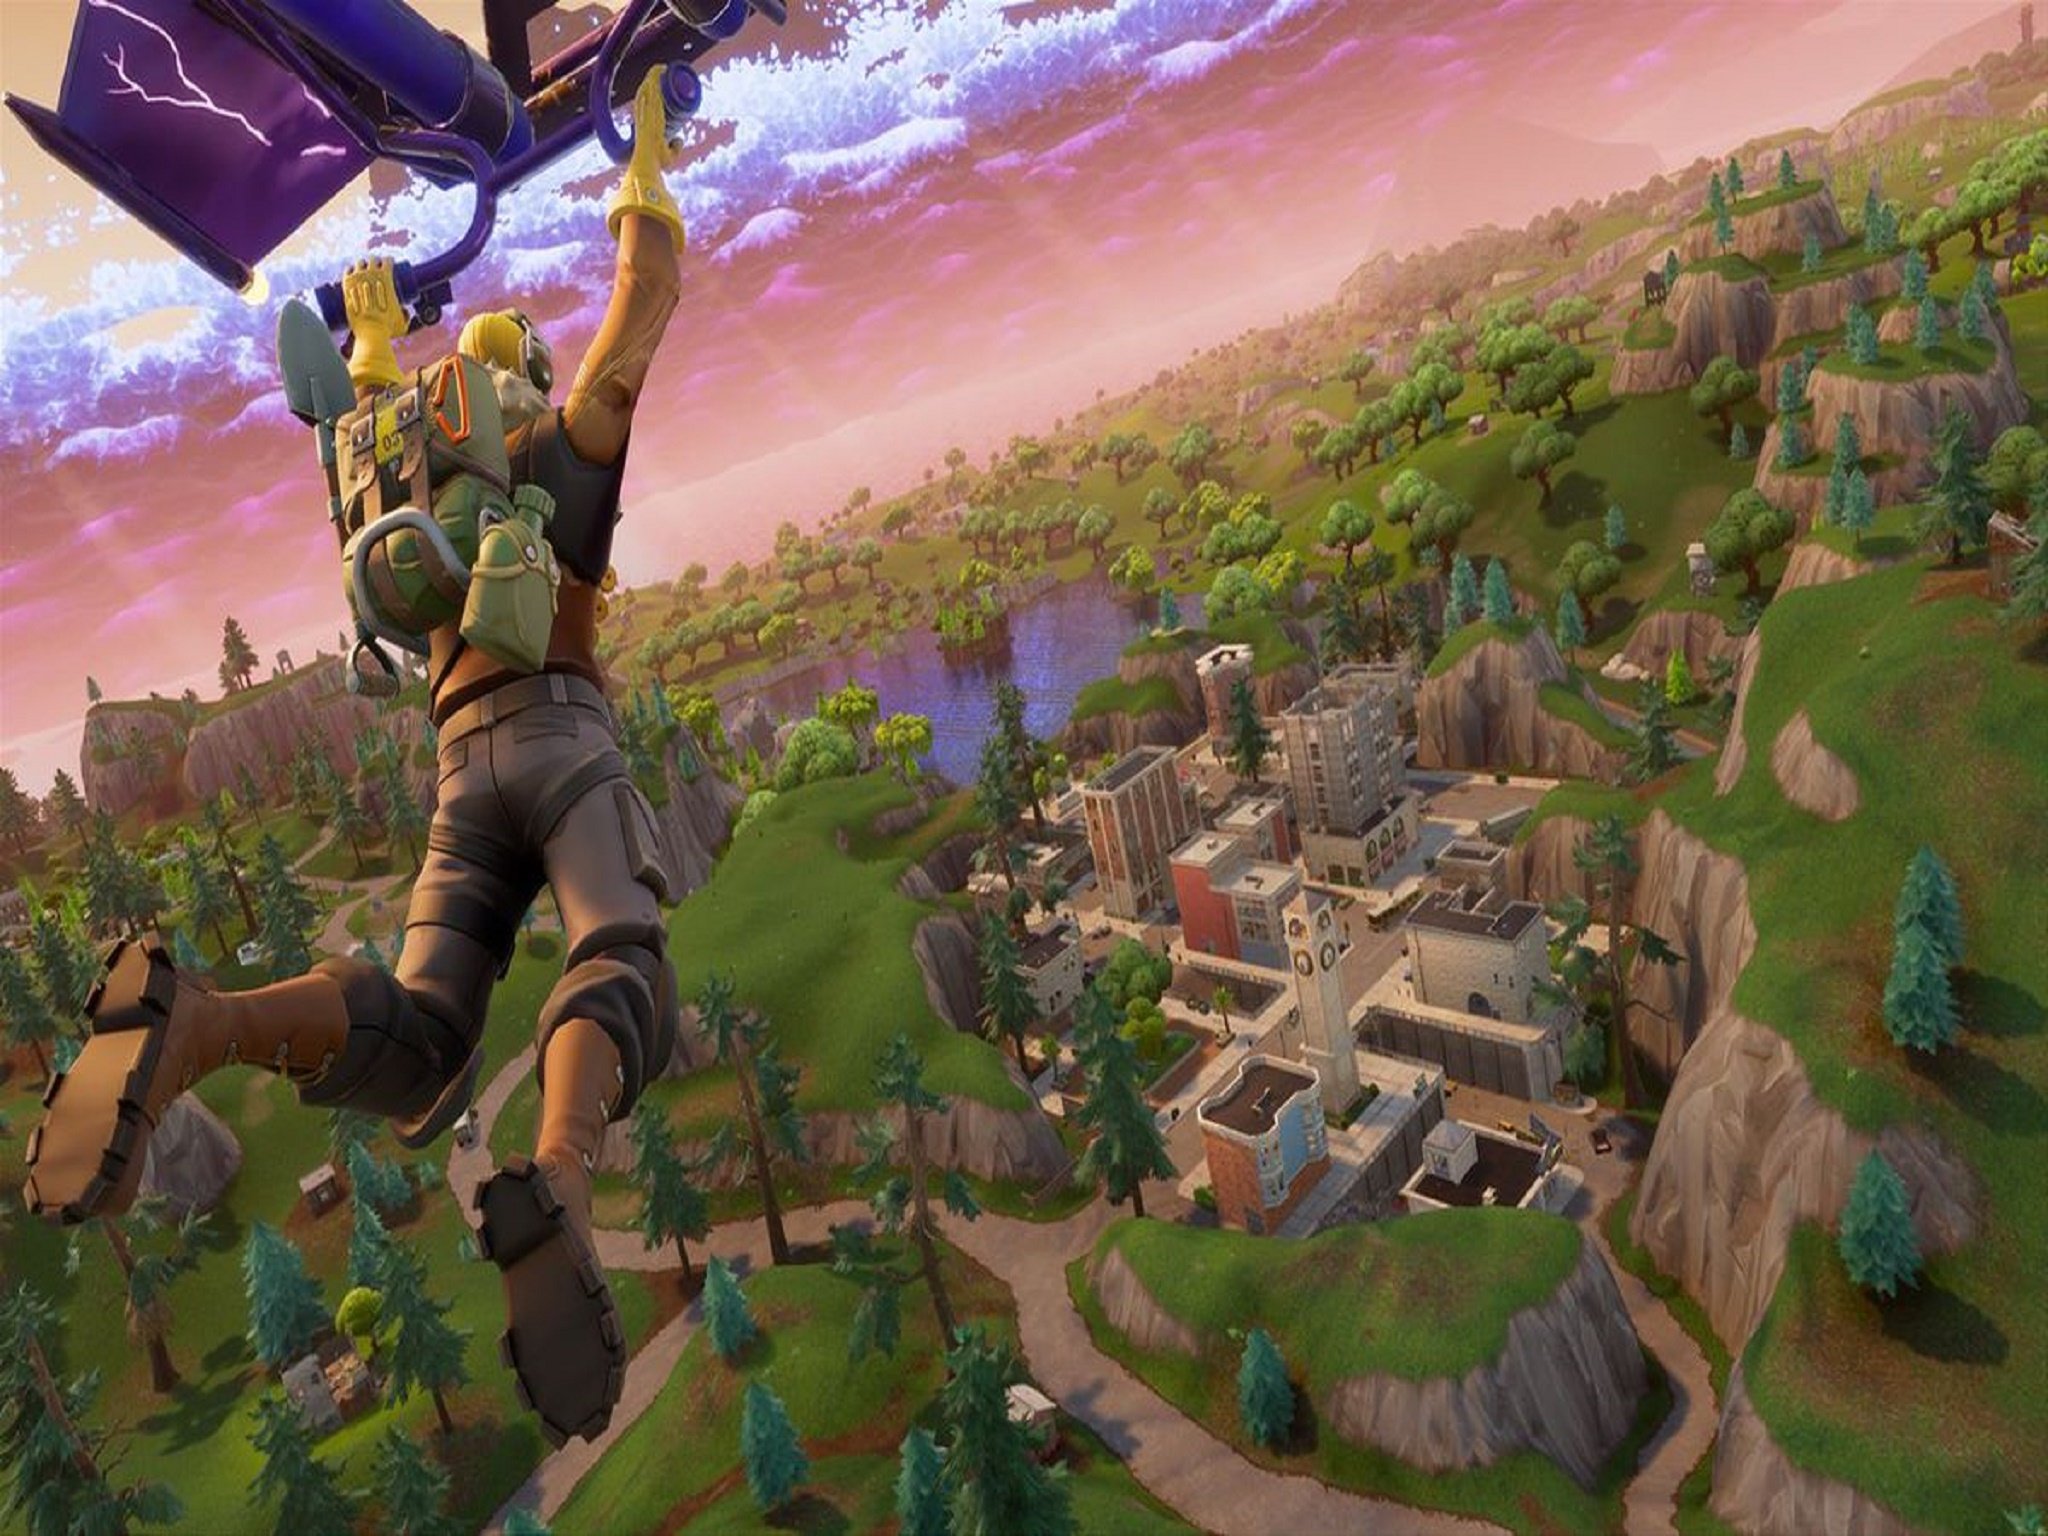 this year at e3 2018 it was announced that fortnite is now on the nintendo switch now you can cross play with fortnite on your pc switch mac ios xbox - can i play fortnite on ps4 pro